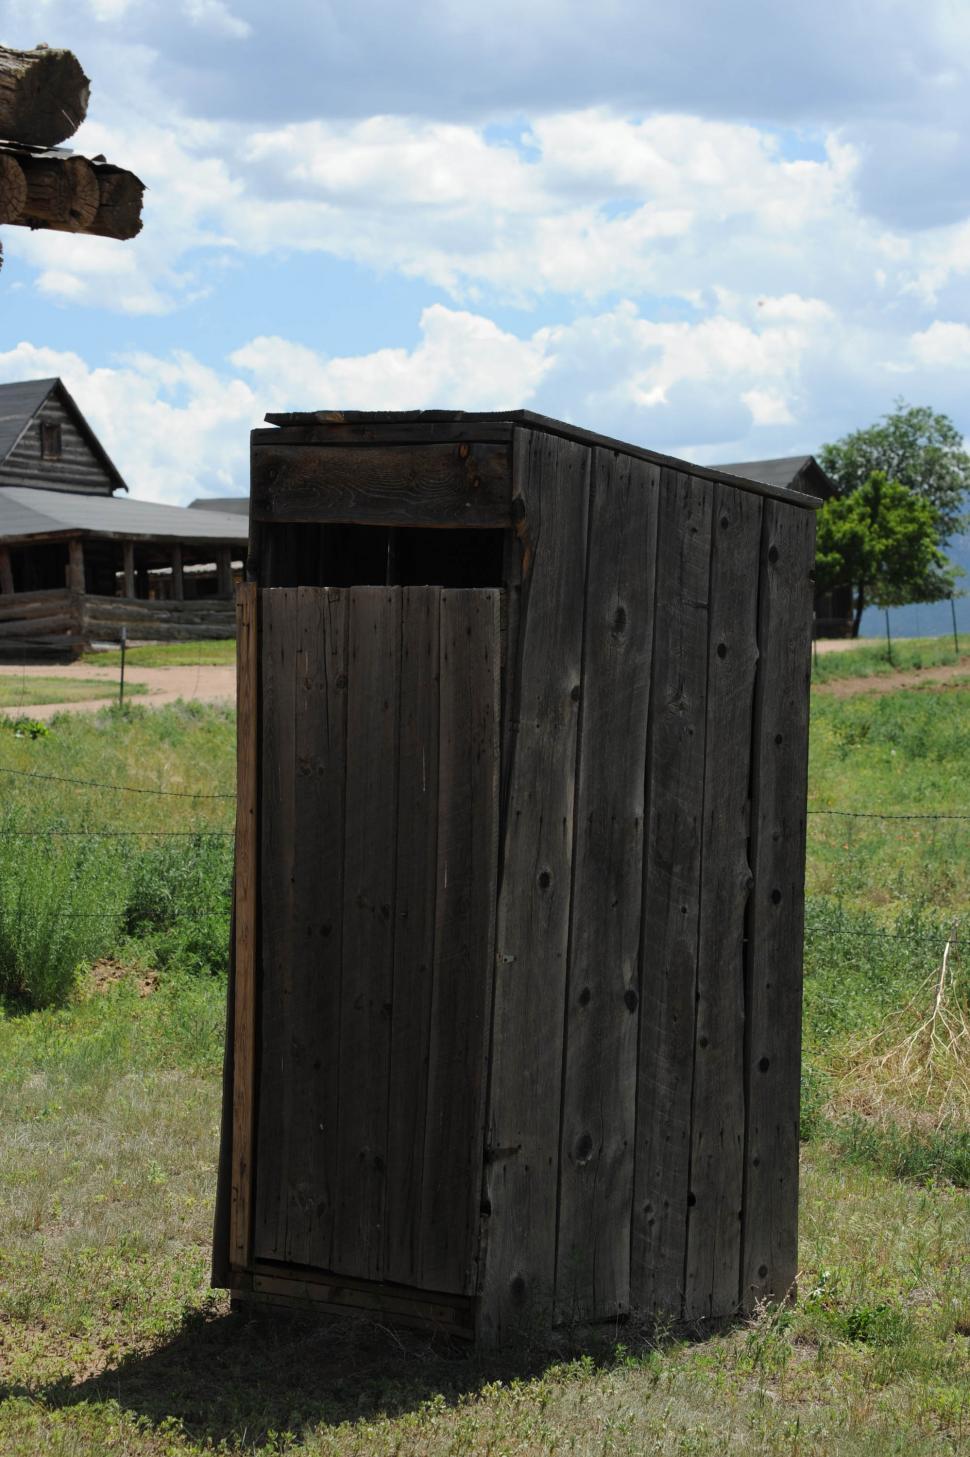 Free Image of Outhouse and Wooden Cabin with Green Grass 